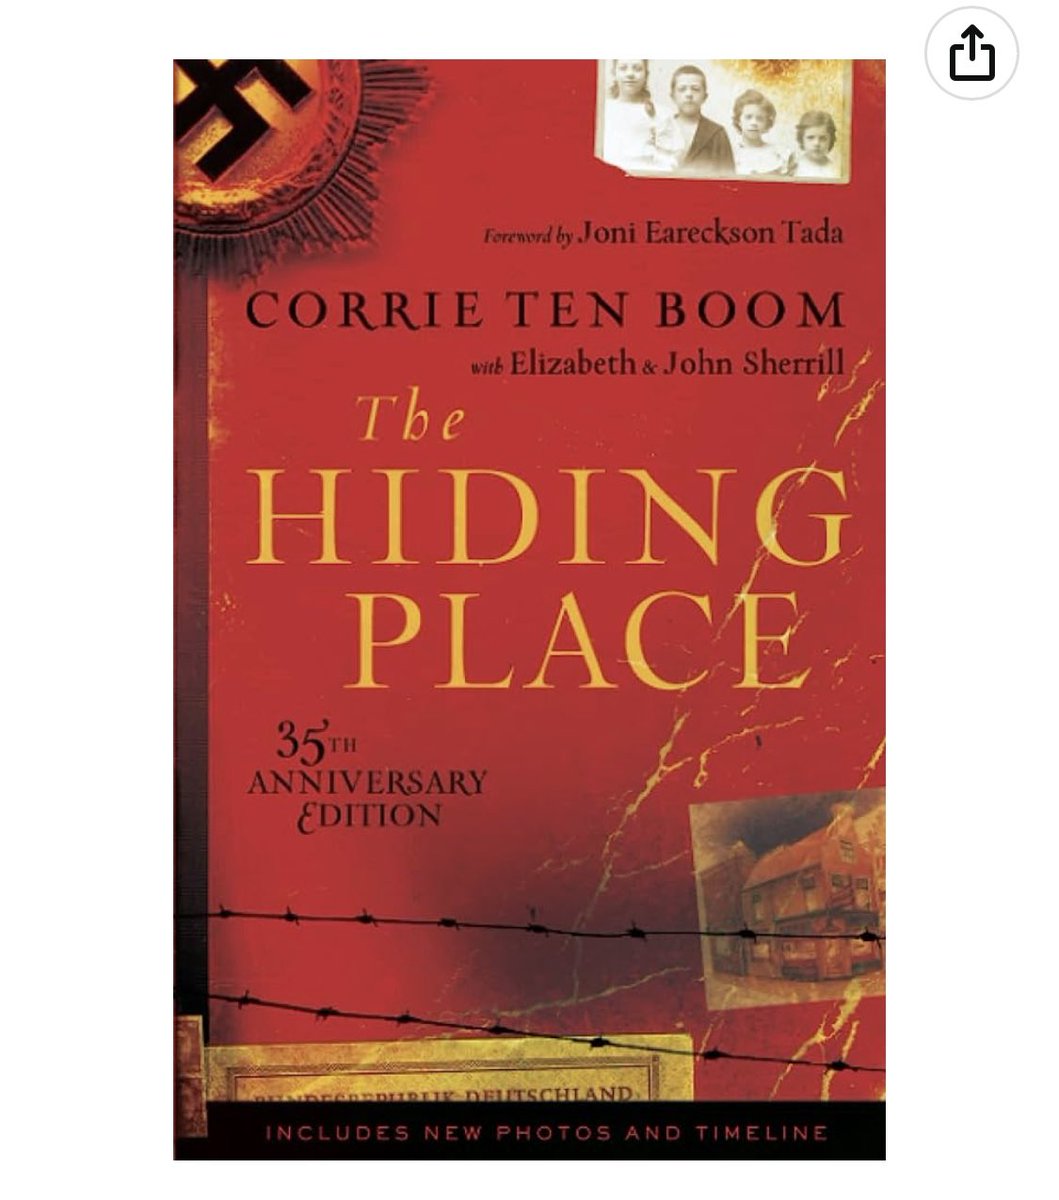 Excellent read. Corrie and her sister Betsie ten Boom were turned in, and sent to the Ravensbrück concentration camp, where her sister died. She miraculously was released by a twist of fate.